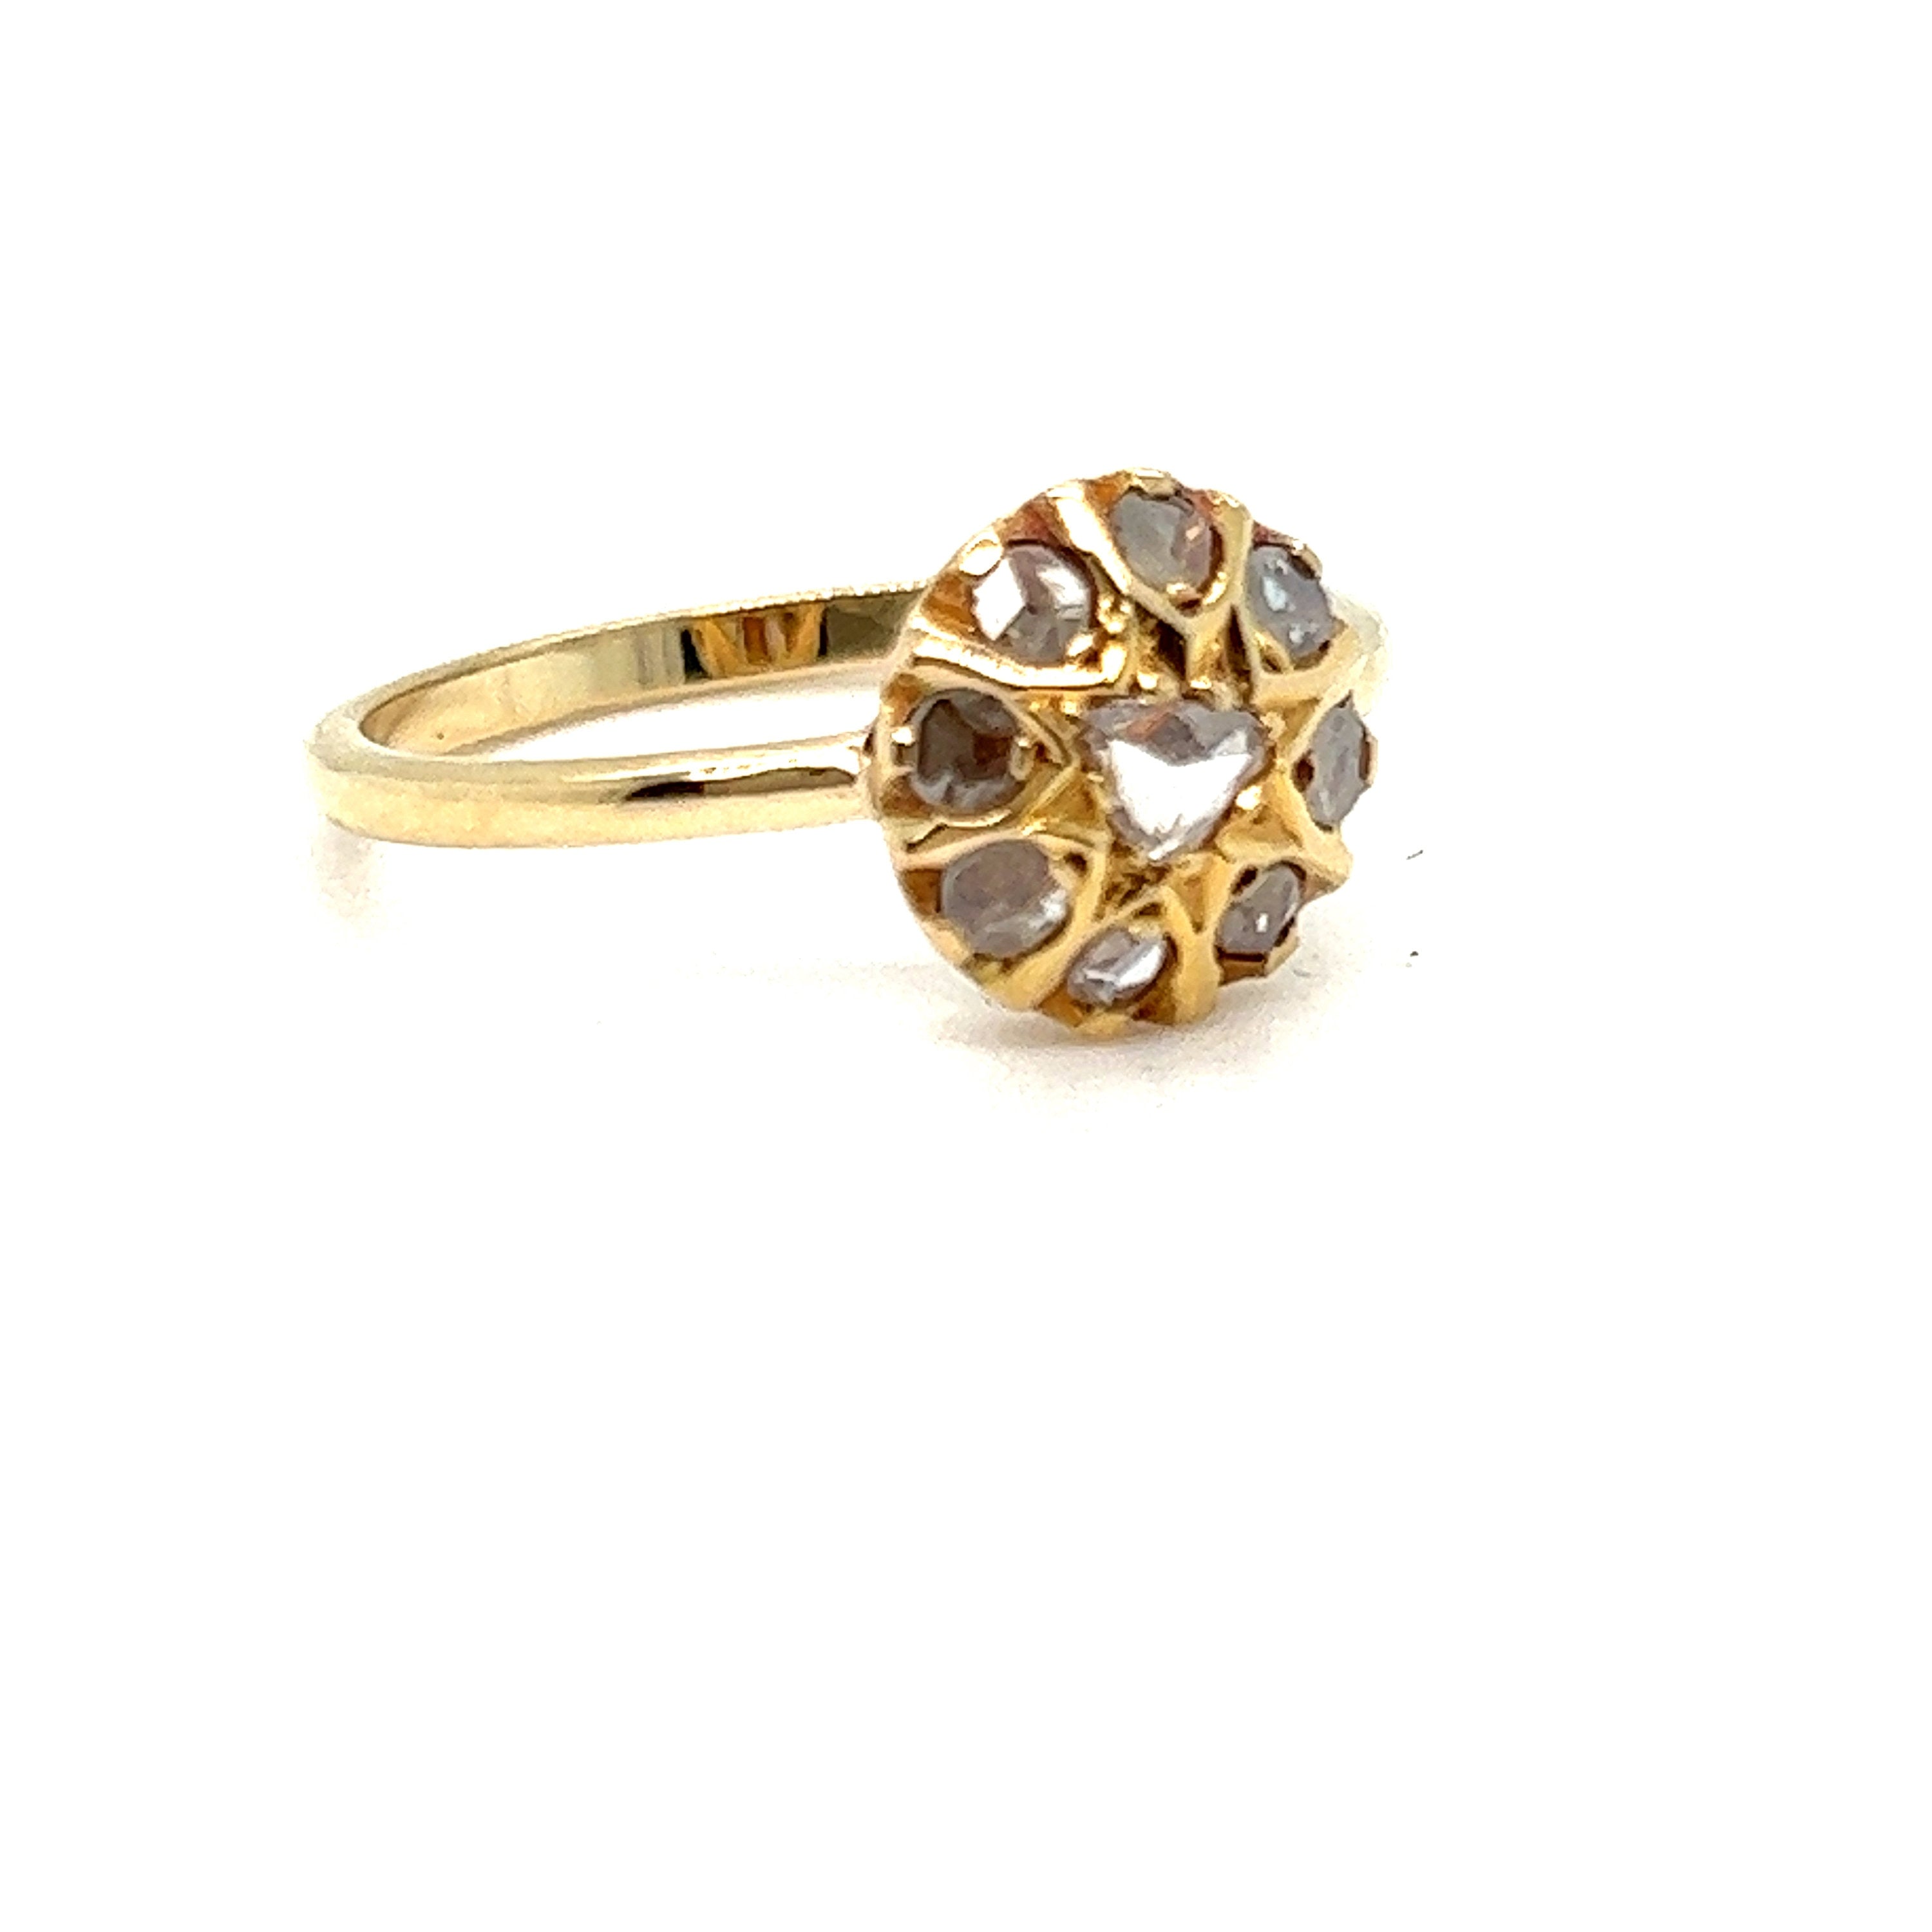 Antique 14K Yellow Gold Rose Cut Diamond Cluster Engagement Ring.